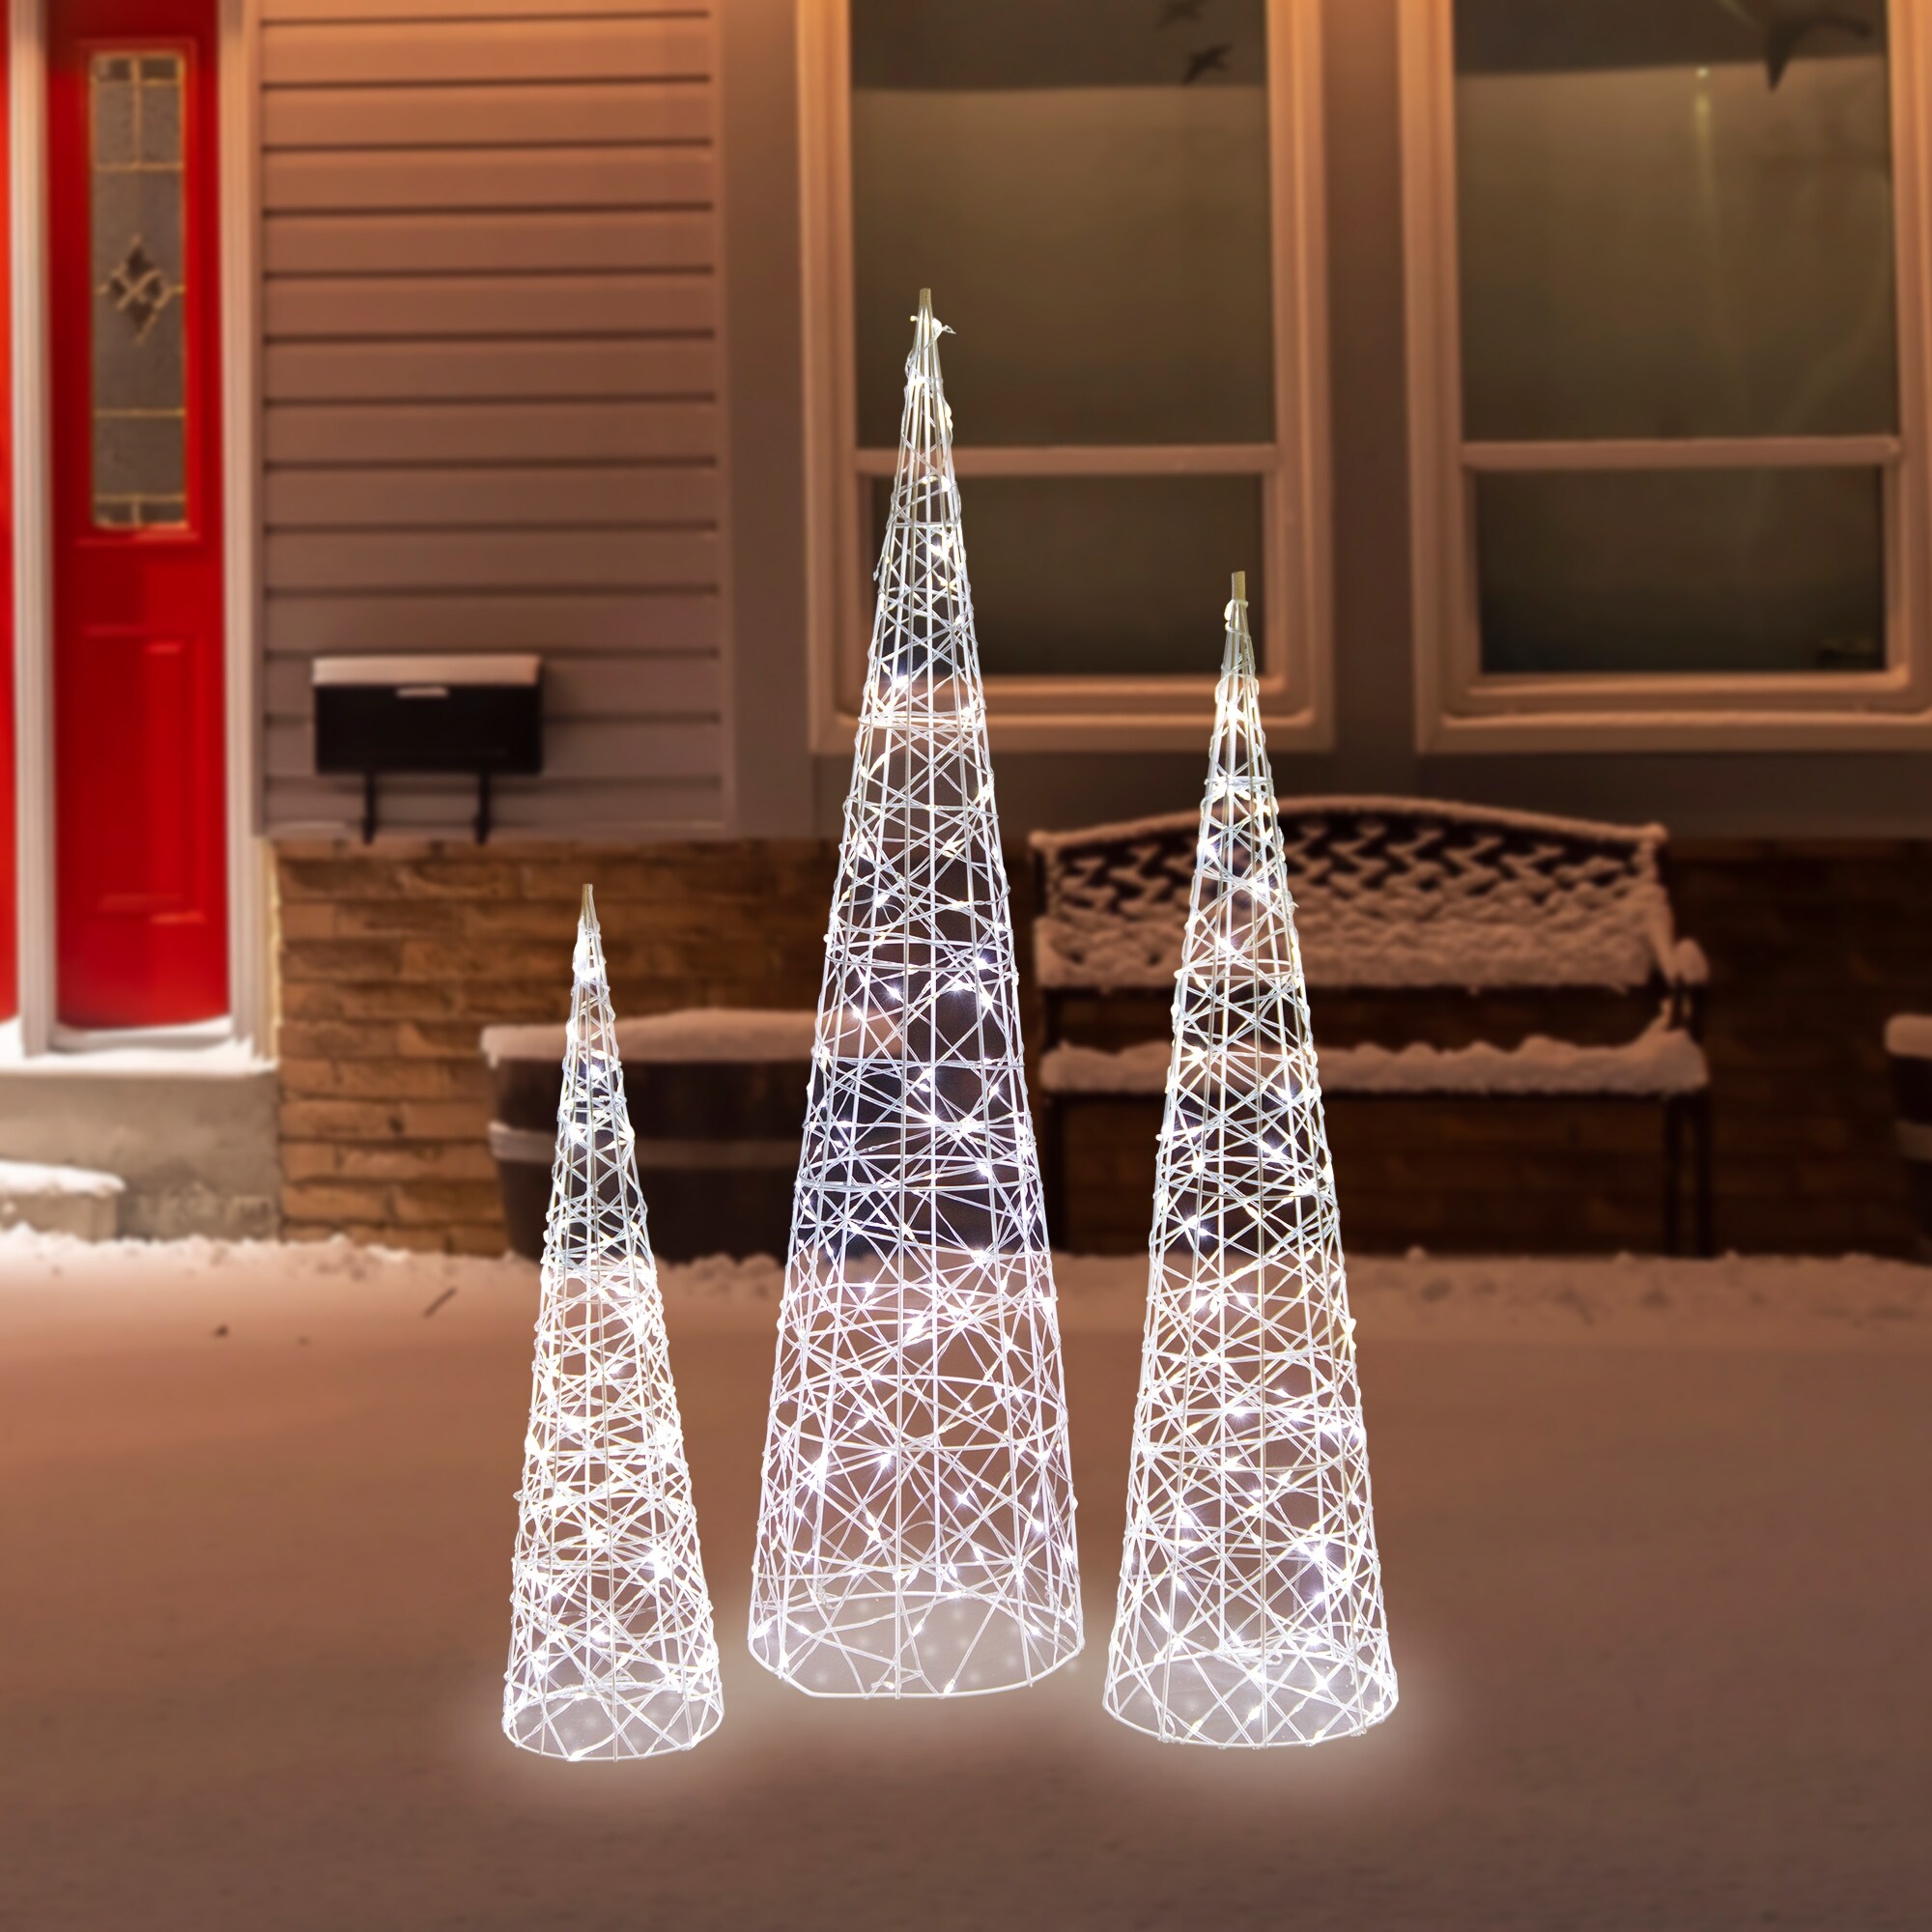 21 Christmas Wire Cone Tree With LED Lights - Bed Bath & Beyond